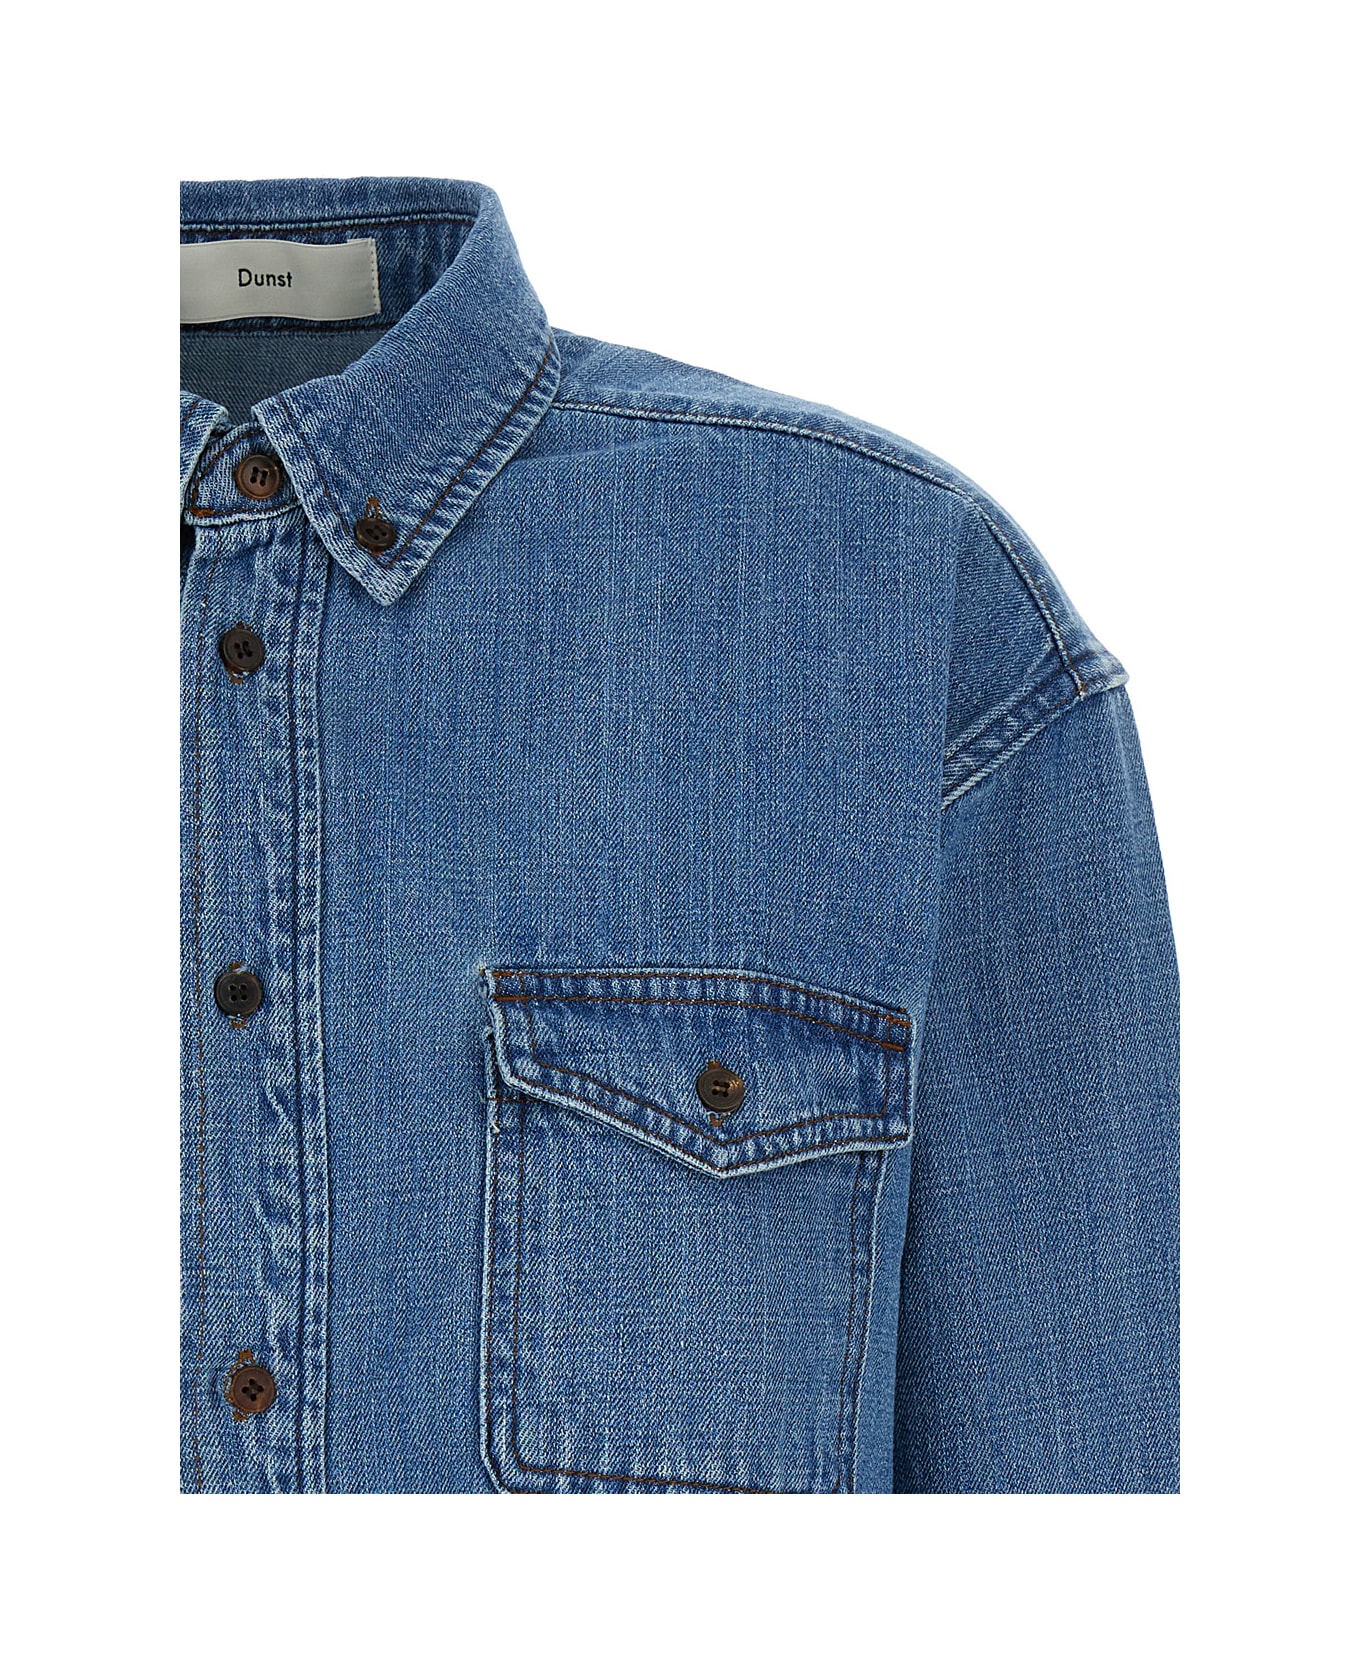 Dunst Blue Denim Shirt With Contrasting Stritching In Cotton Woman - Blu